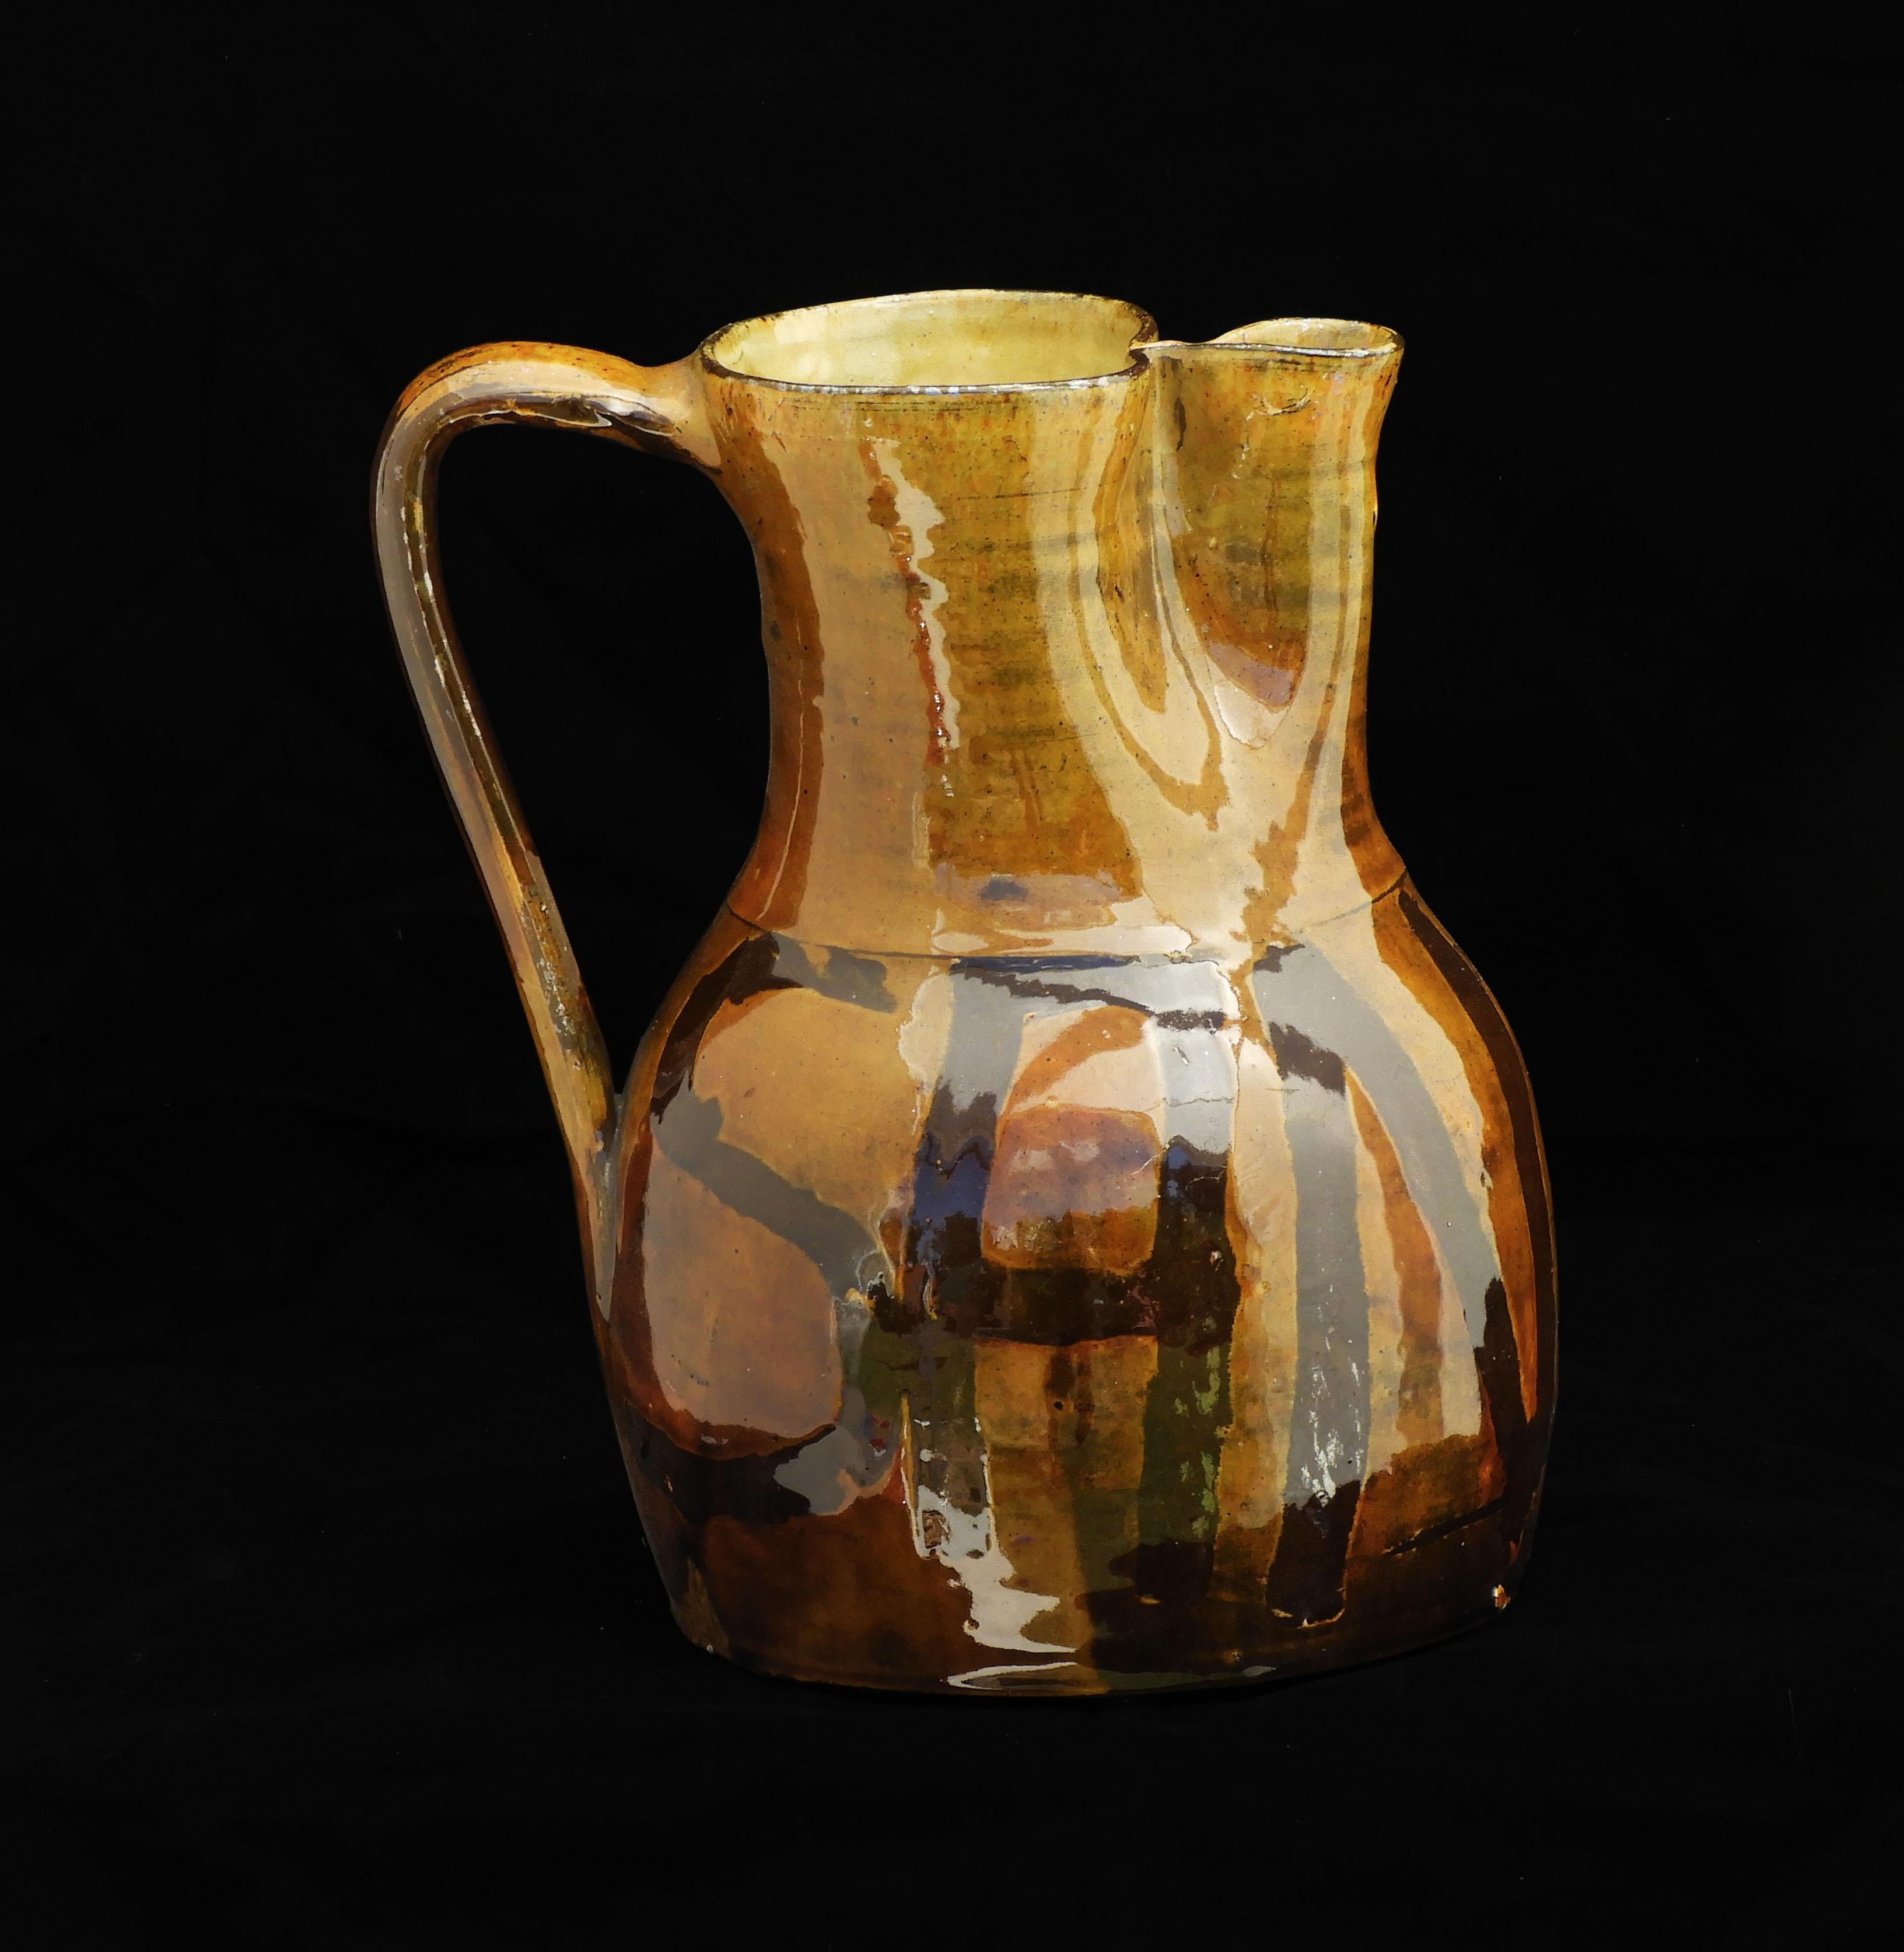 Spanish Folk Art Sangria Jug or Wine Pitcher  Early 20th Century.

Wonderful yellow ochre high glaze flat-bottomed ceramic vessel.   Beautiful and practical, a fabulous hand-crafted one-of-a-kind piece, perfect for summer entertaining!

.